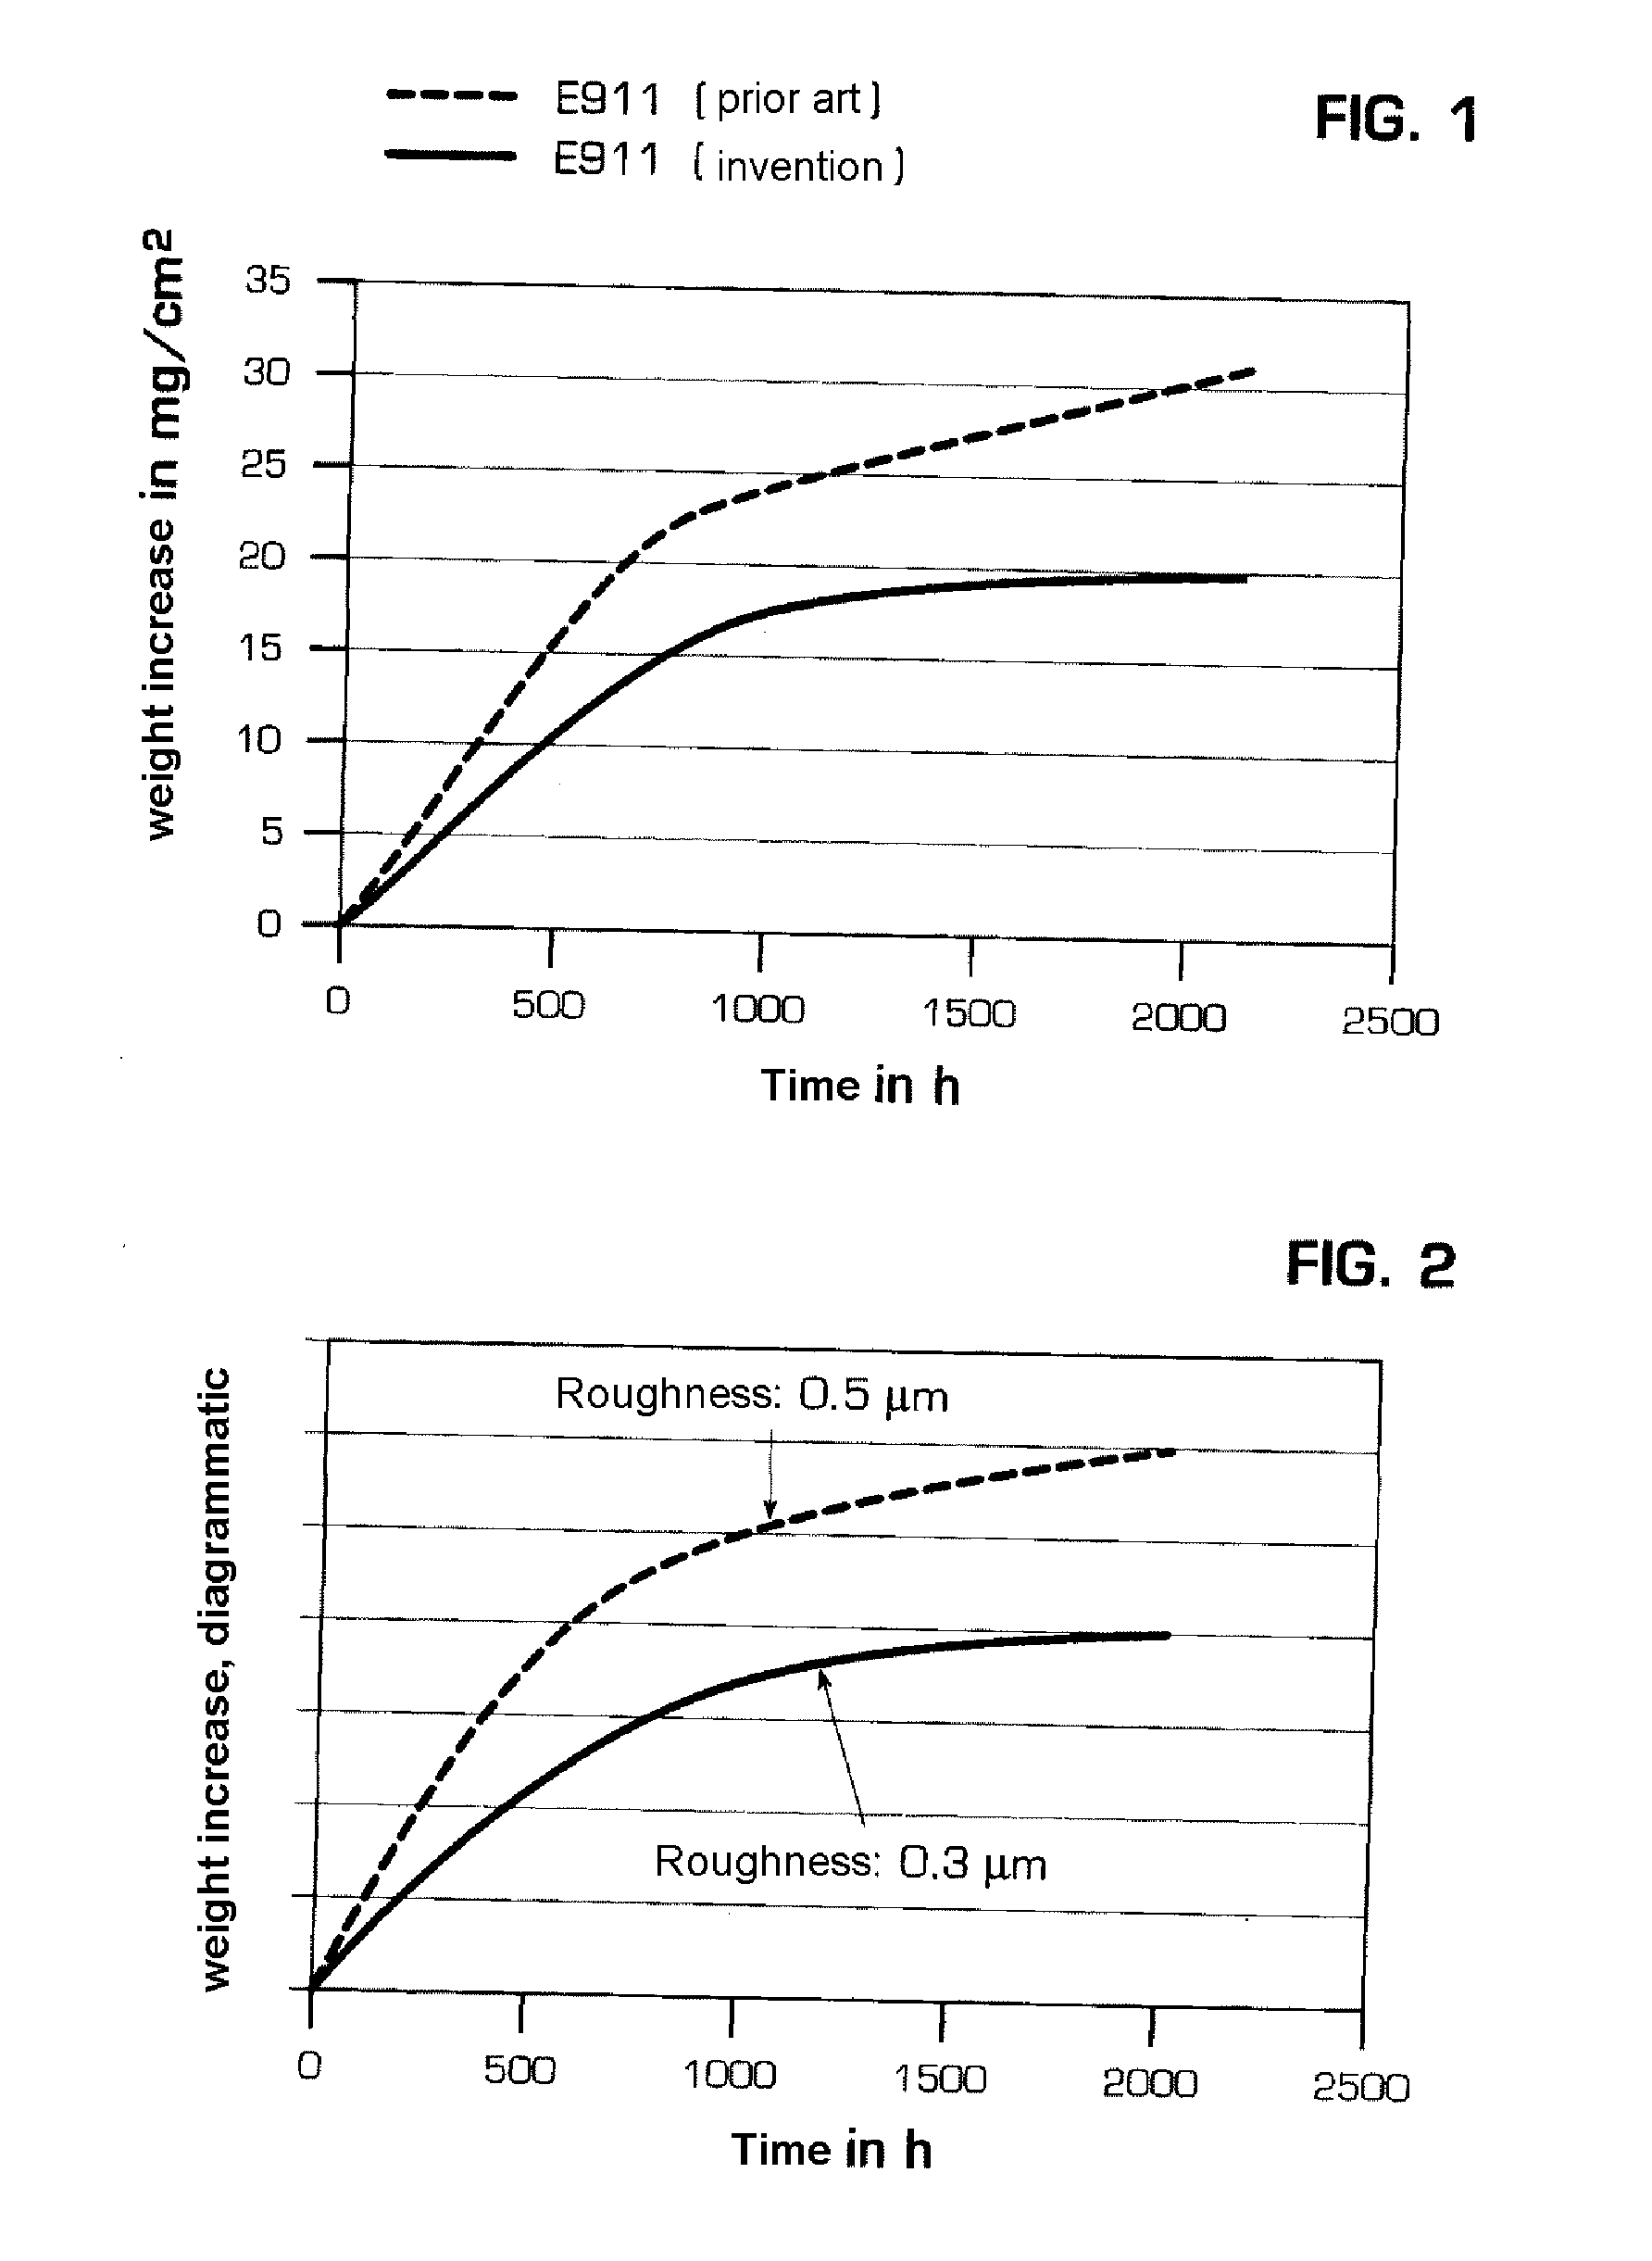 Method for the surface treatment of ferritic/martensitic 9 - 12% cr steel